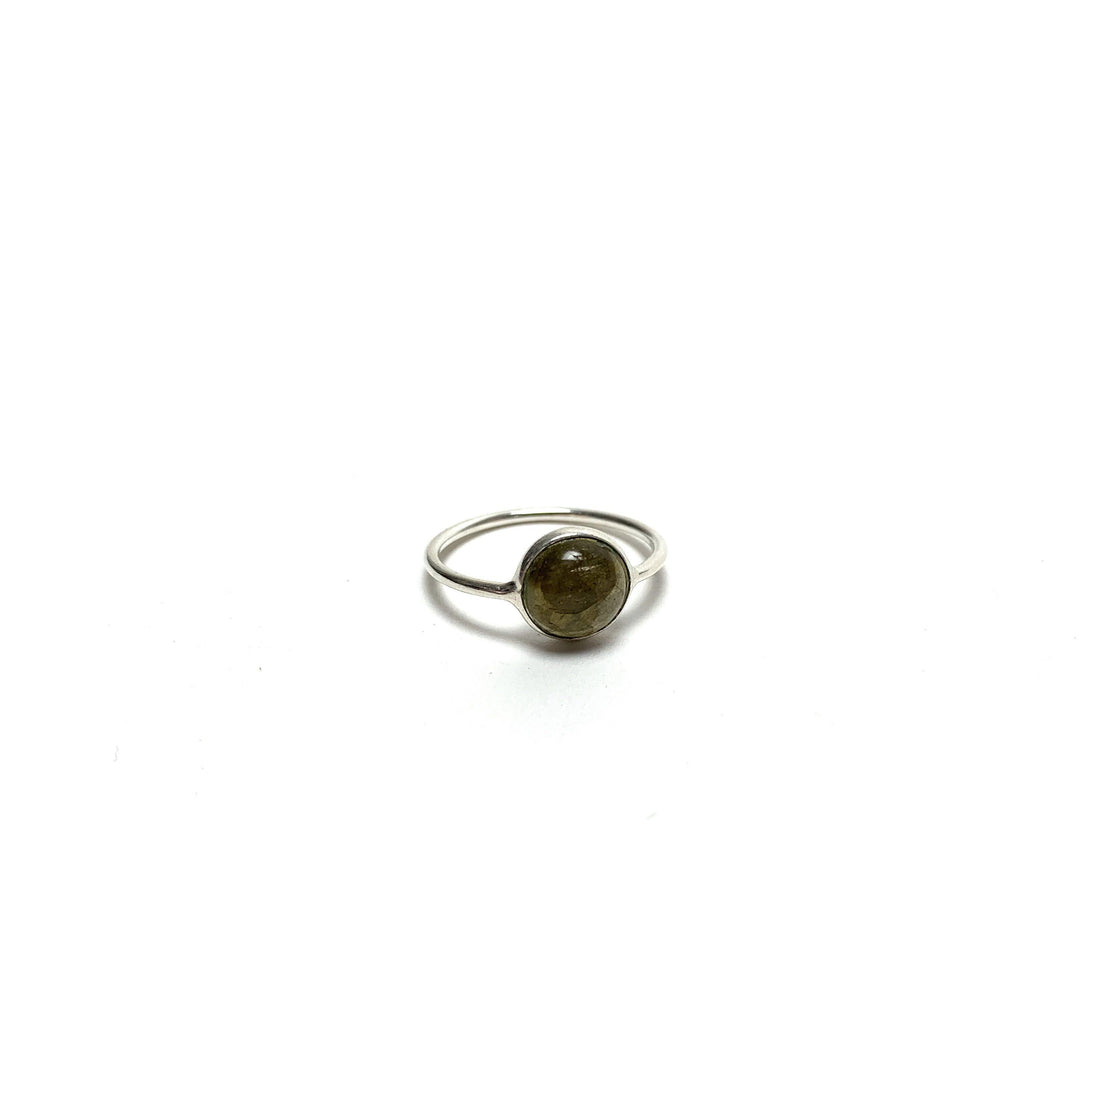 Labradorite Silver Ring Rings Crystals A. $18.00 Size 5 